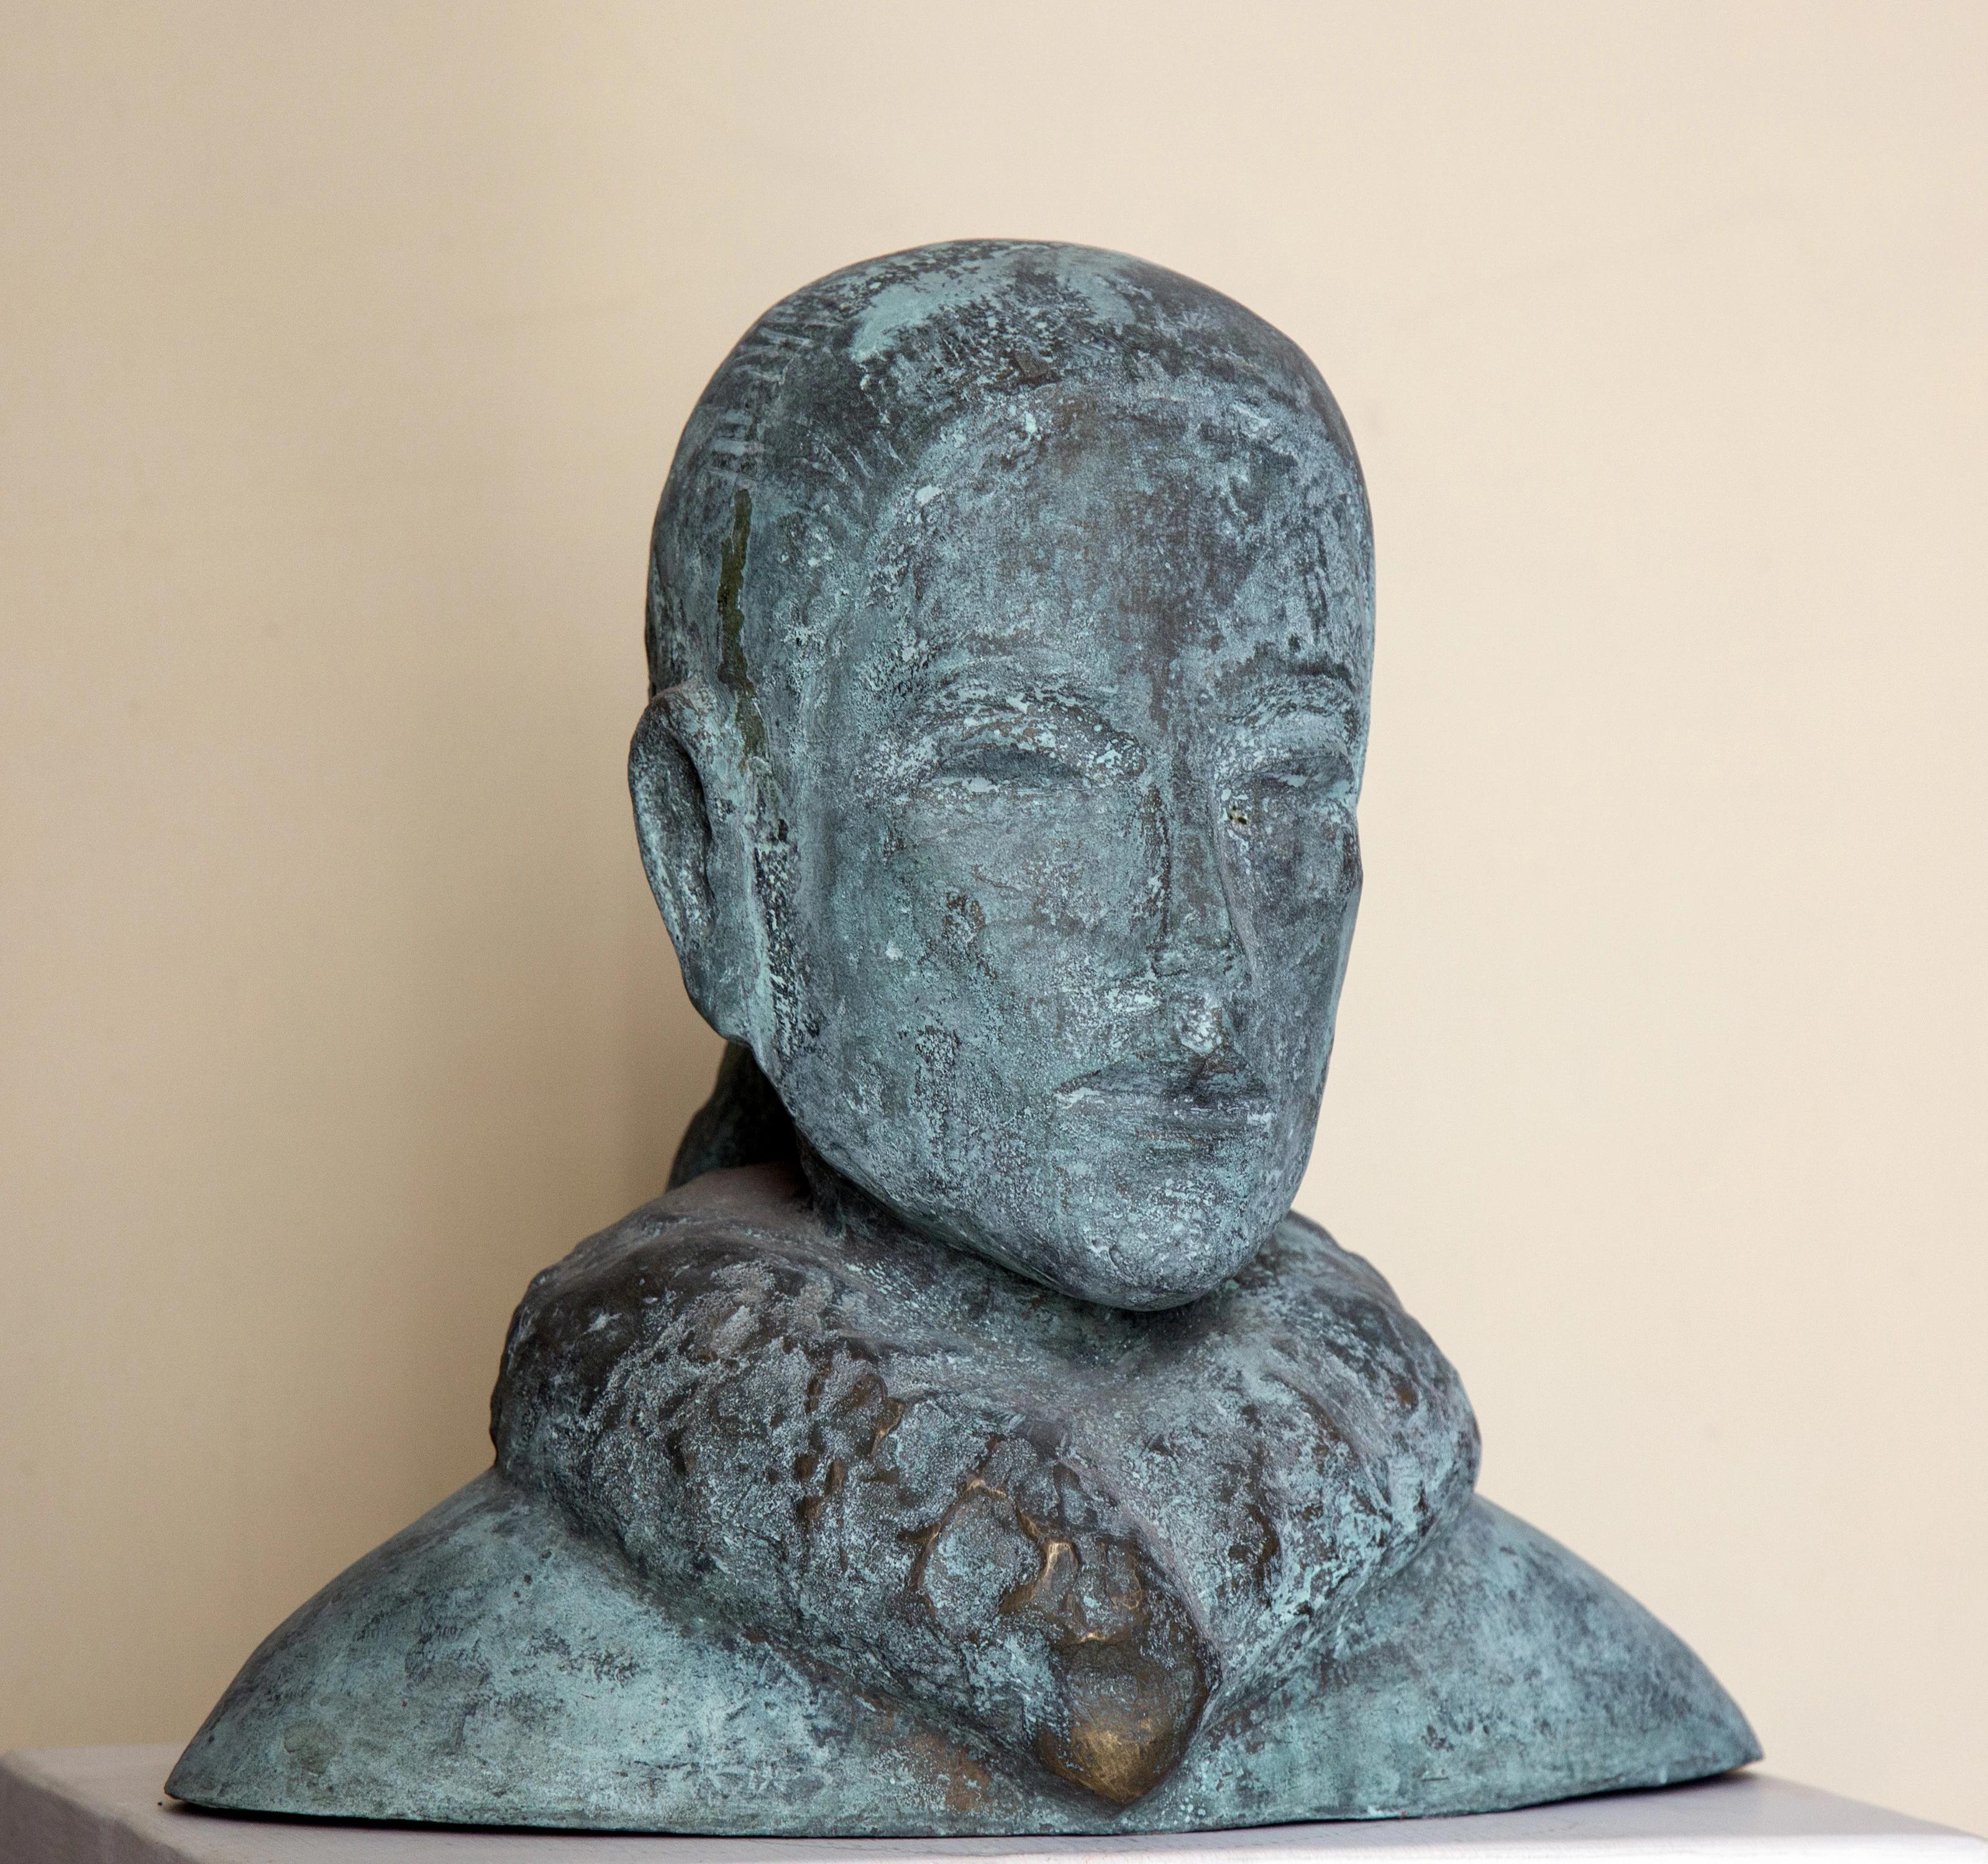 "Tai" Bronze Sculpture 12" x 13" x 10" inch by Sarkis Tossonian

Sarkis Tossoonian was born in Alexandria in 1953. He graduated from the Faculty of Fine Arts/Sculpture in 1979. He started exhibiting in individual and group exhibitions in Alexandria